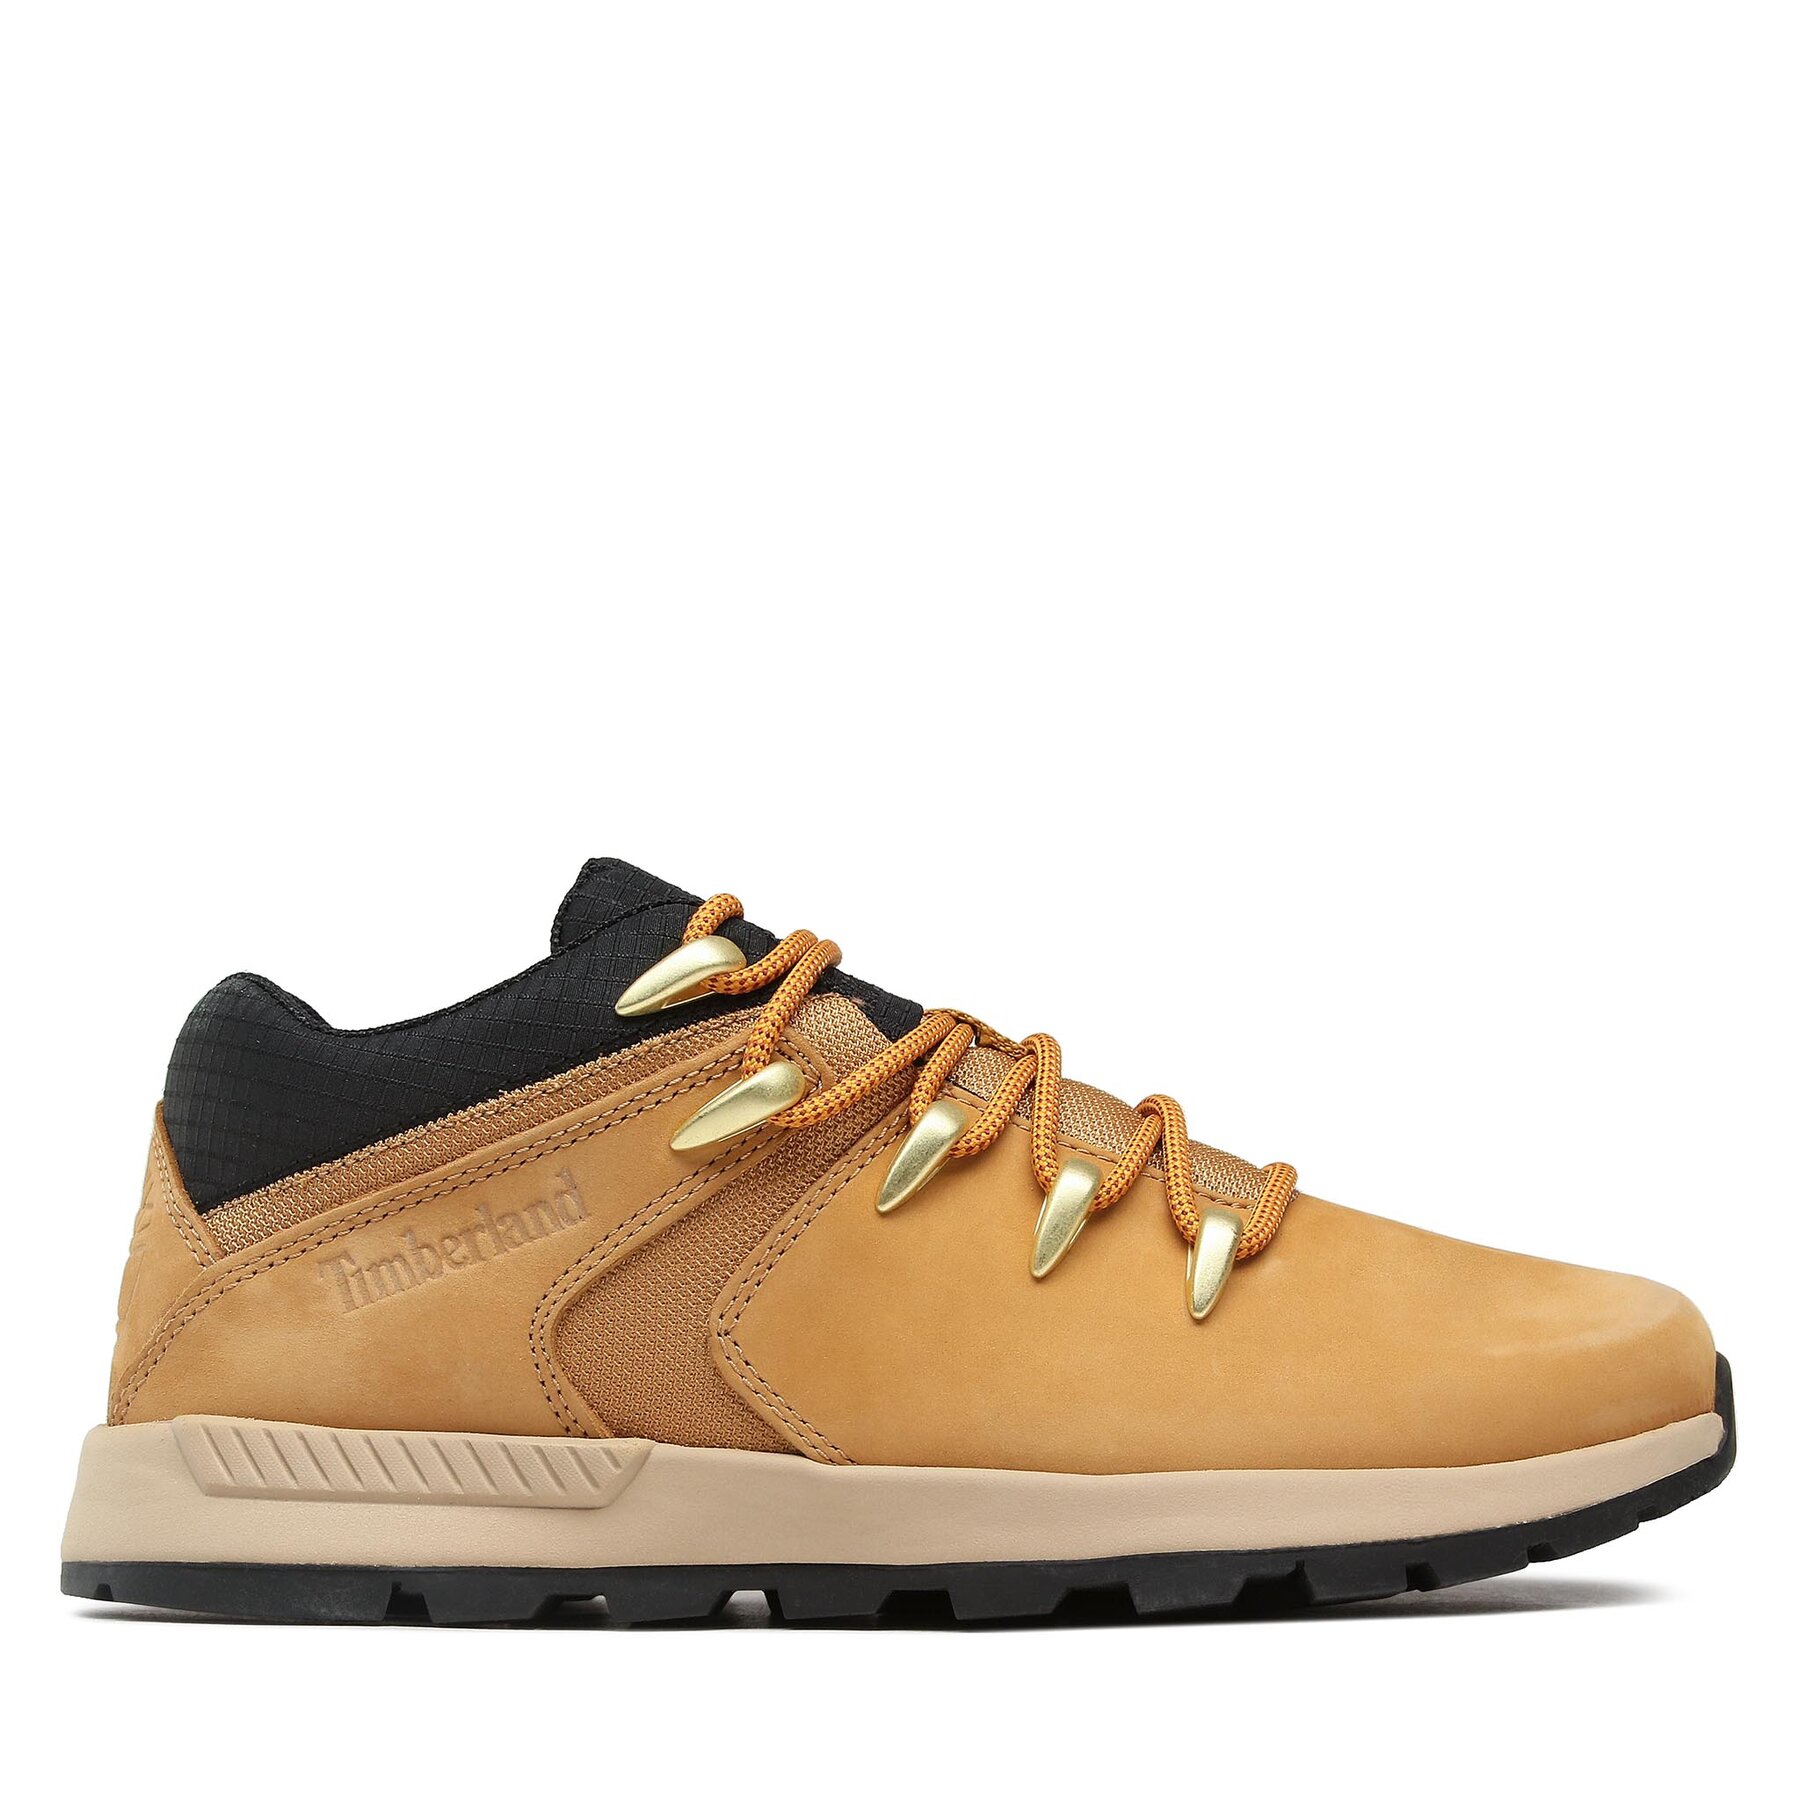 Sneakers Timberland Oxford Sprint TB0A5VJG2311 Wheat von Timberland